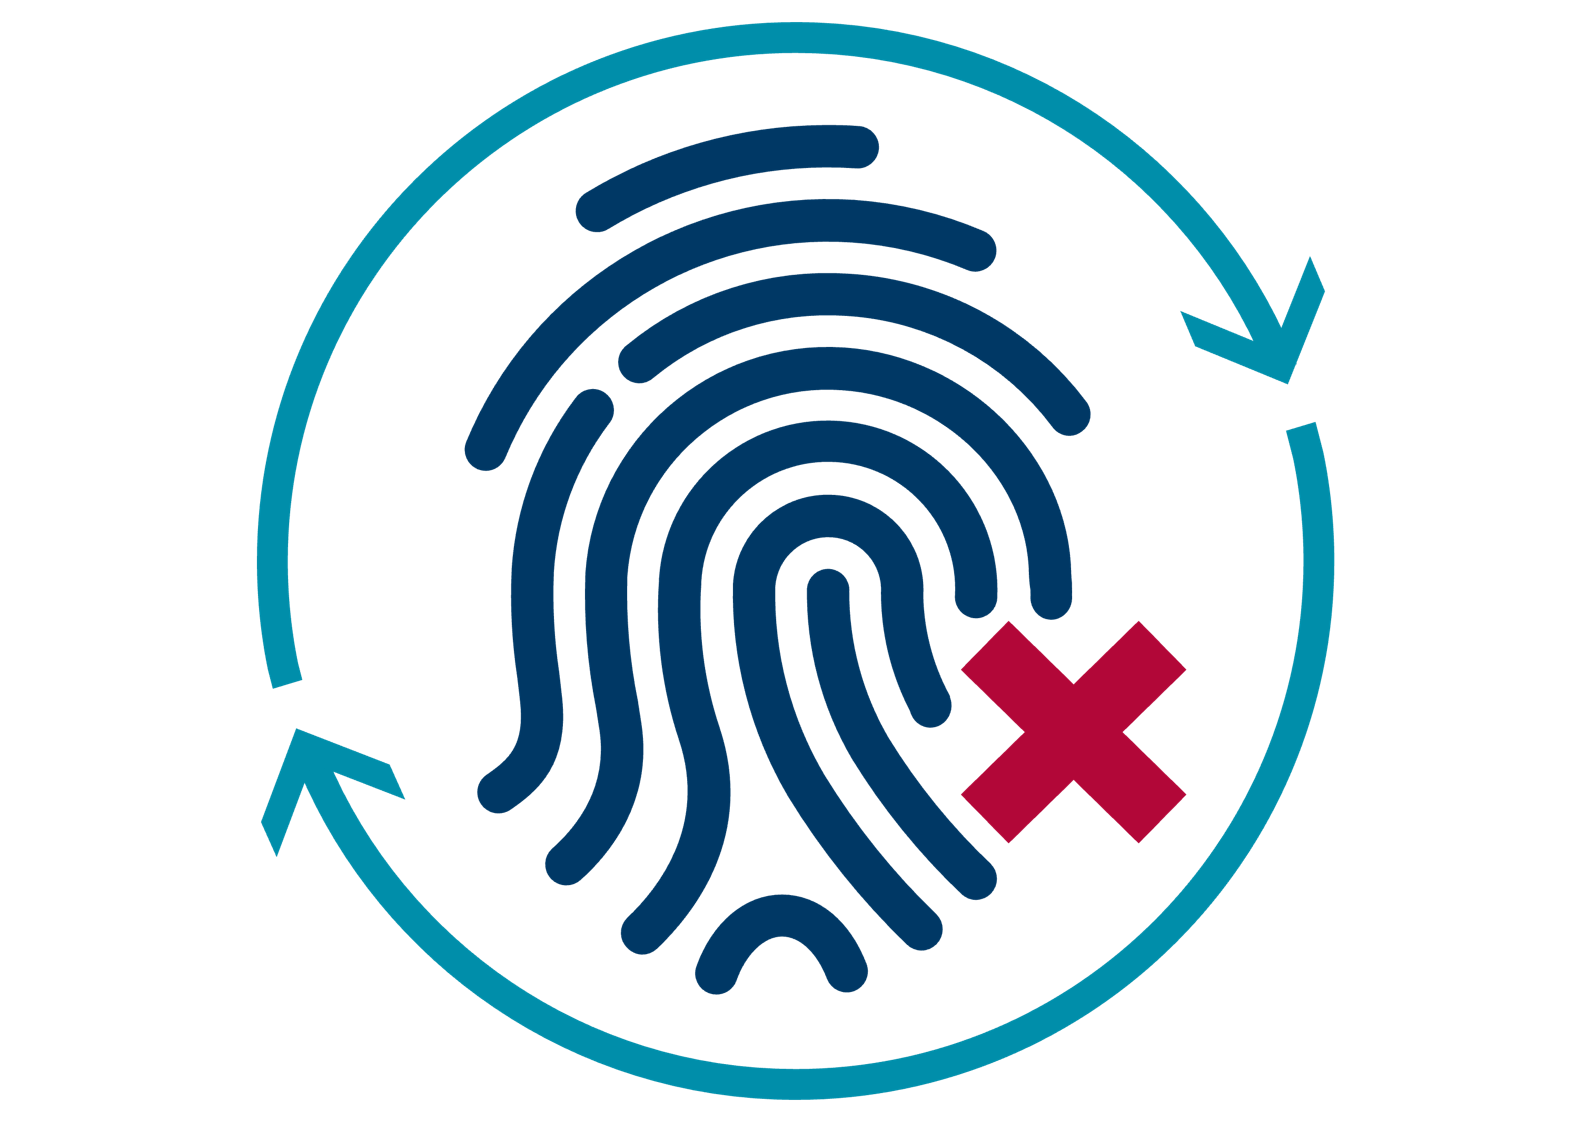 Dark blue fingerprint icon with red x on the right side and a light blue circular arrow around it